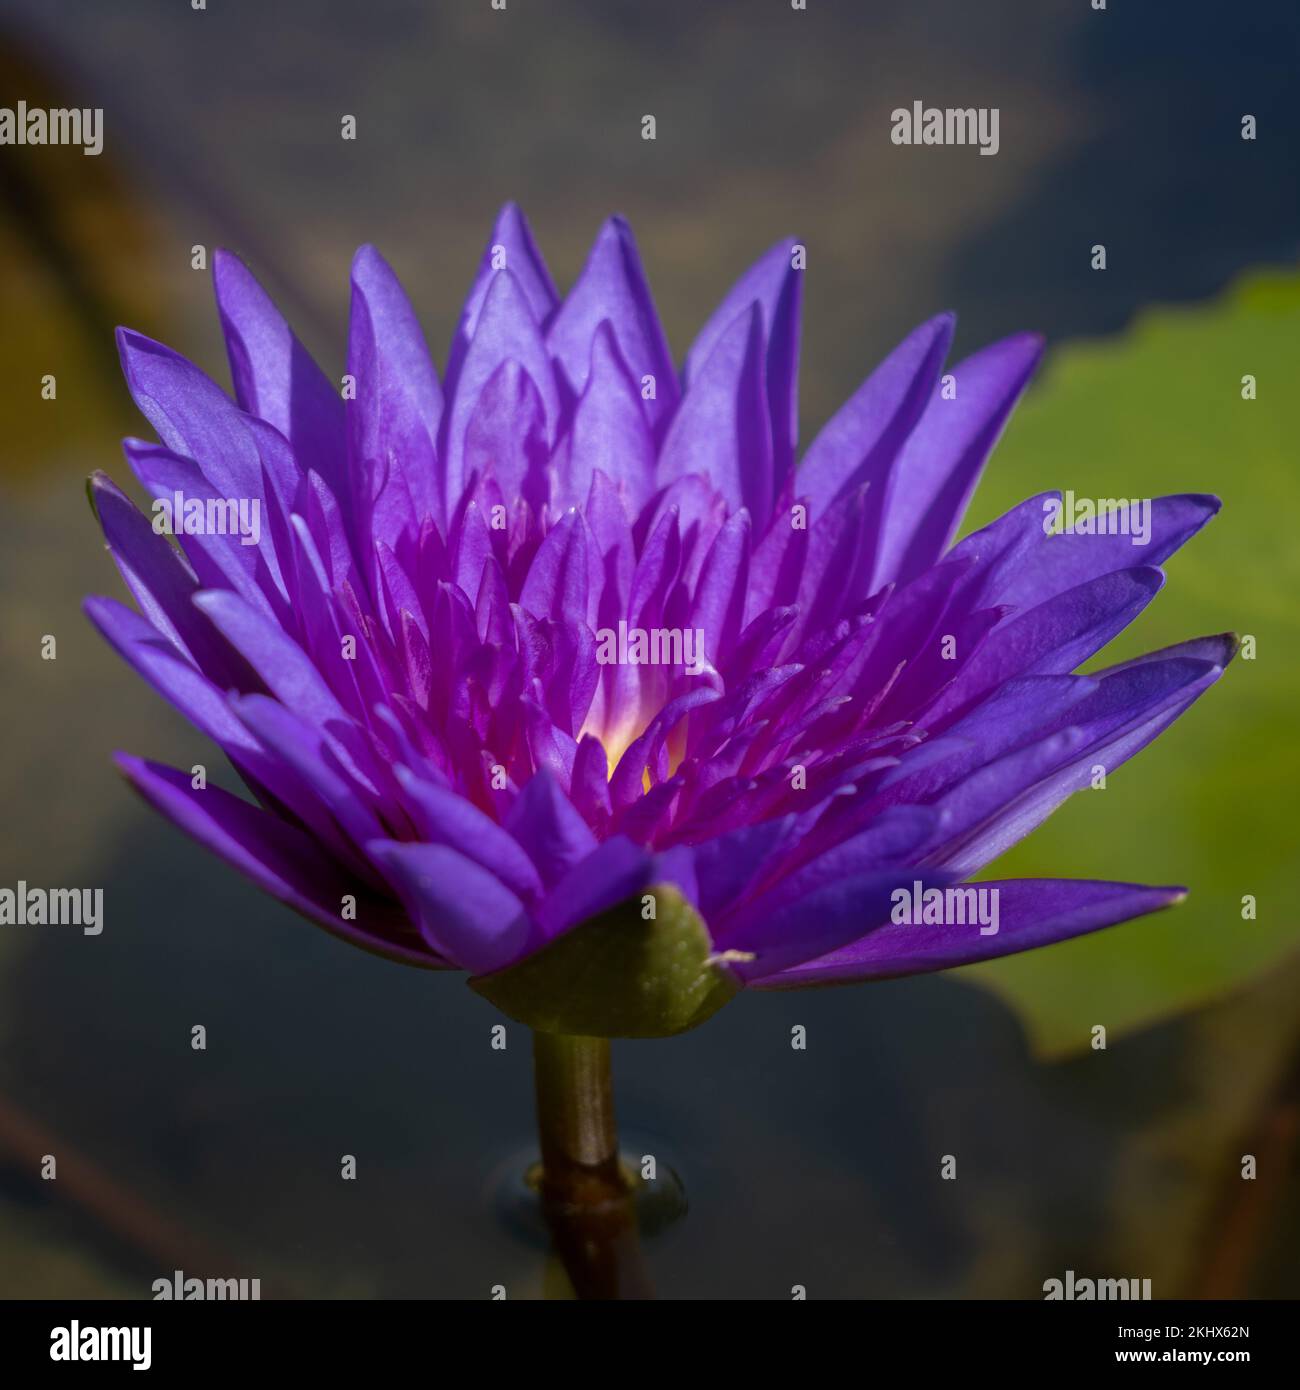 Closeup view of purple blue water lily king of siam nymphaea flower blooming in pond Stock Photo